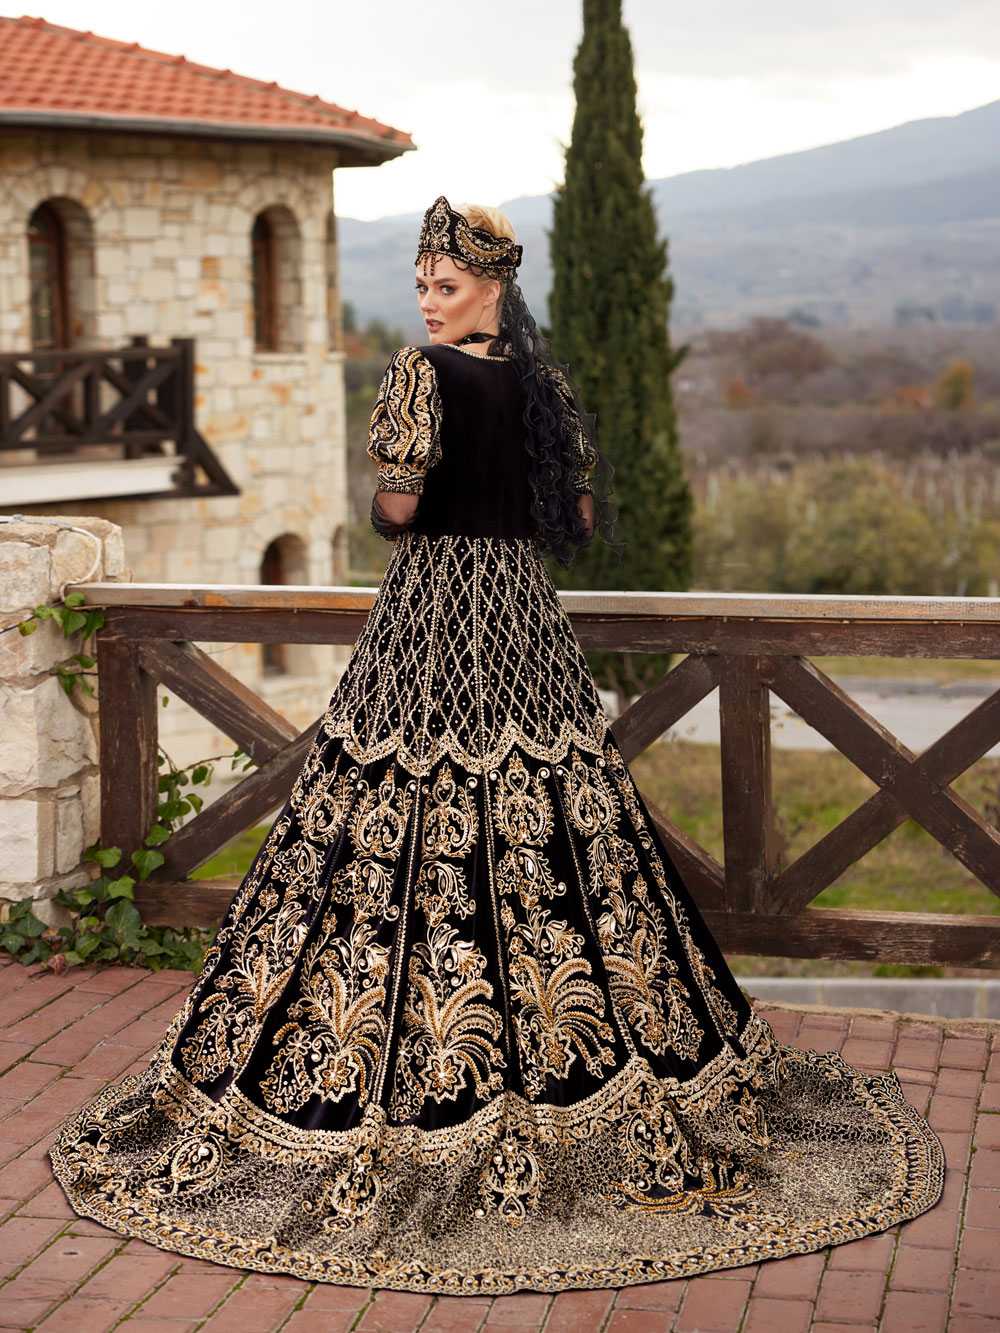 Black Lace Illusion One Sleeve Feather Custom Made Prom Dress